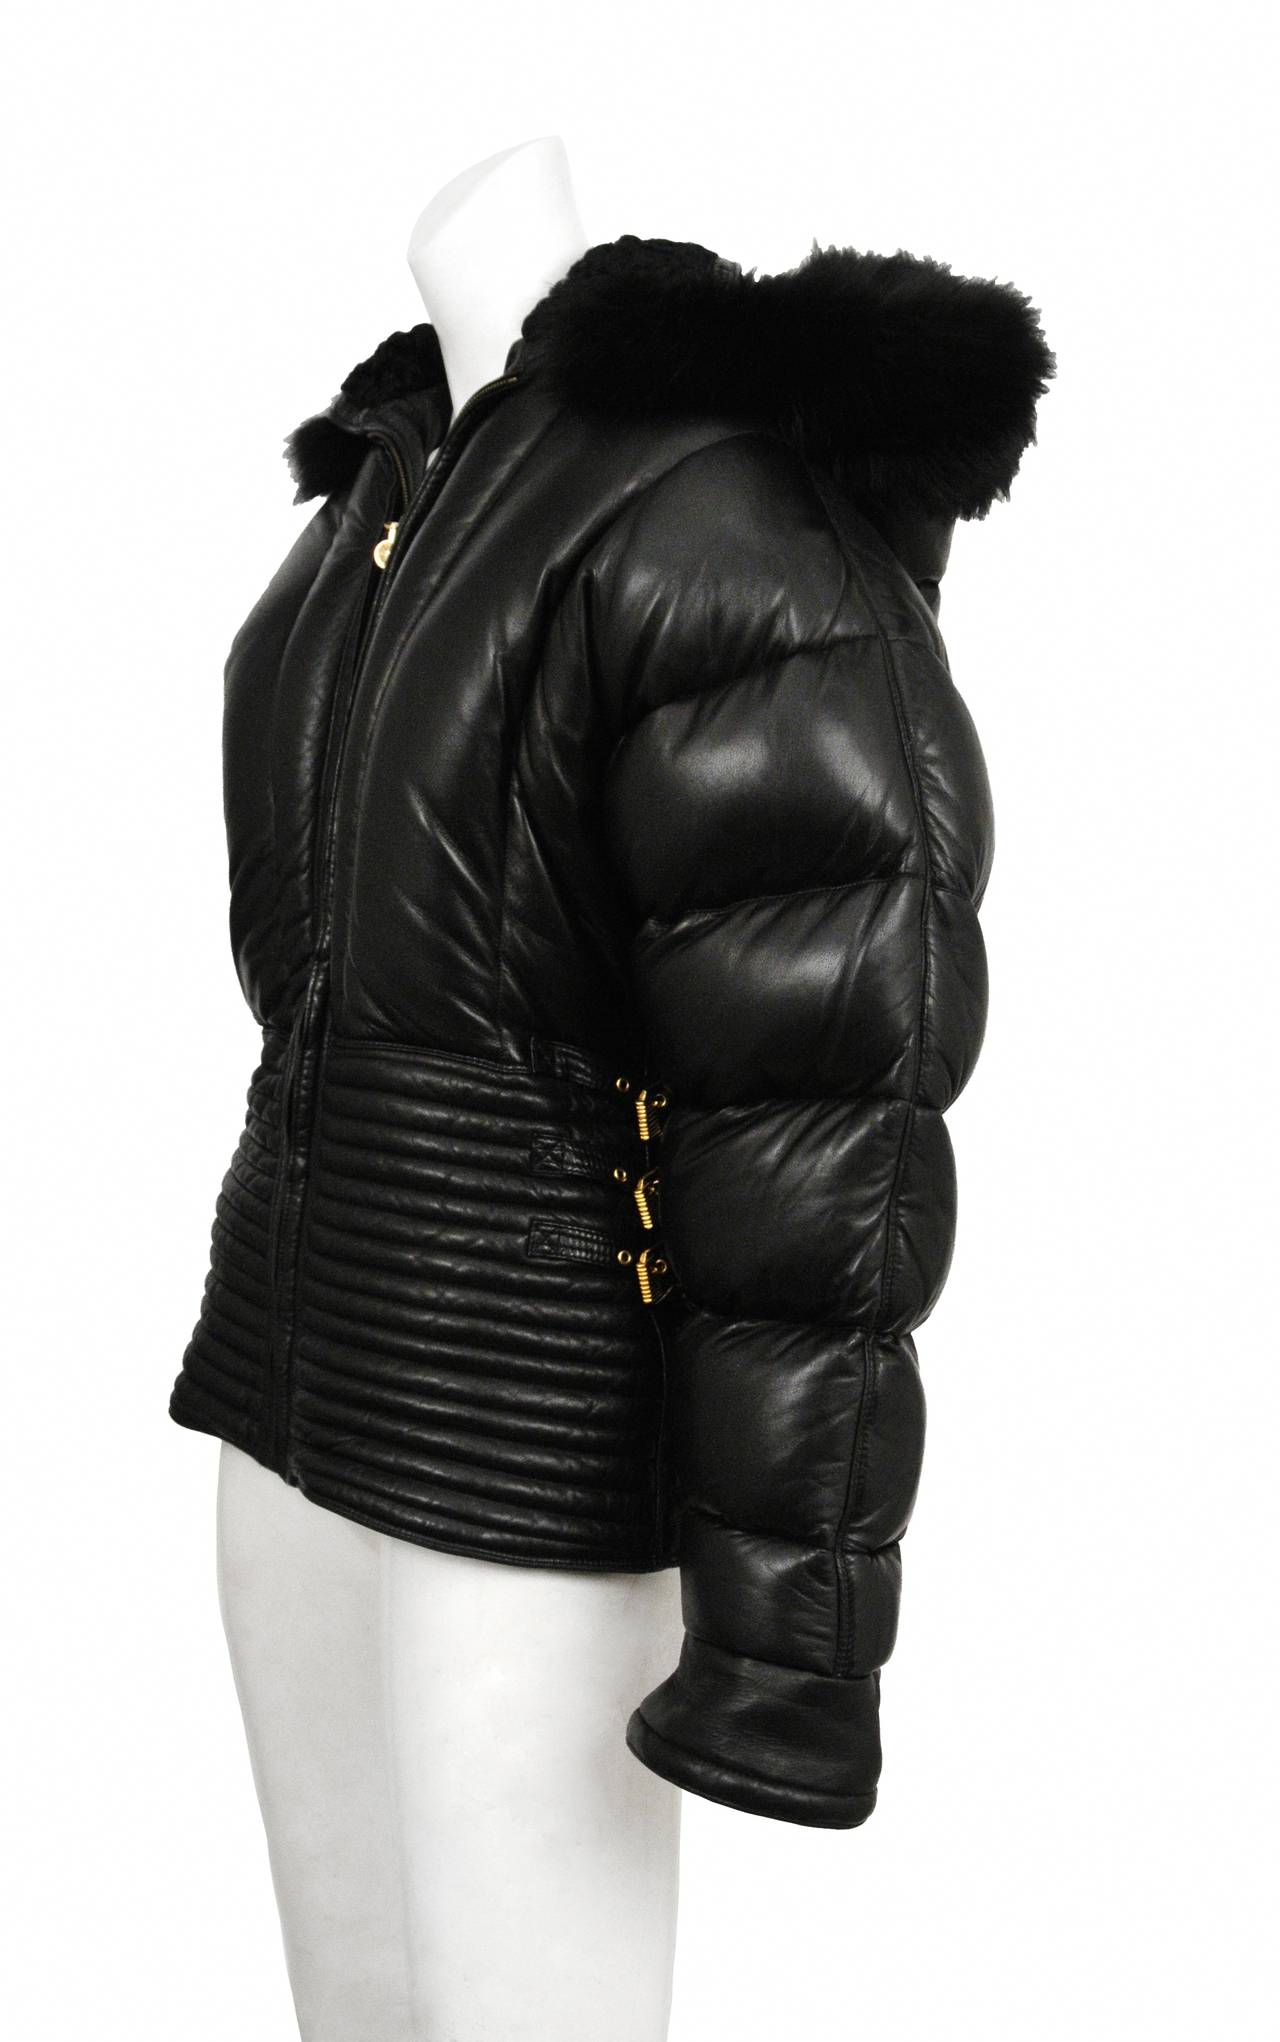 Vintage Gianni Versace black lambskin leather horizontal quilt zip front puffer jacket with mongolian fur lined hood with fox trim.